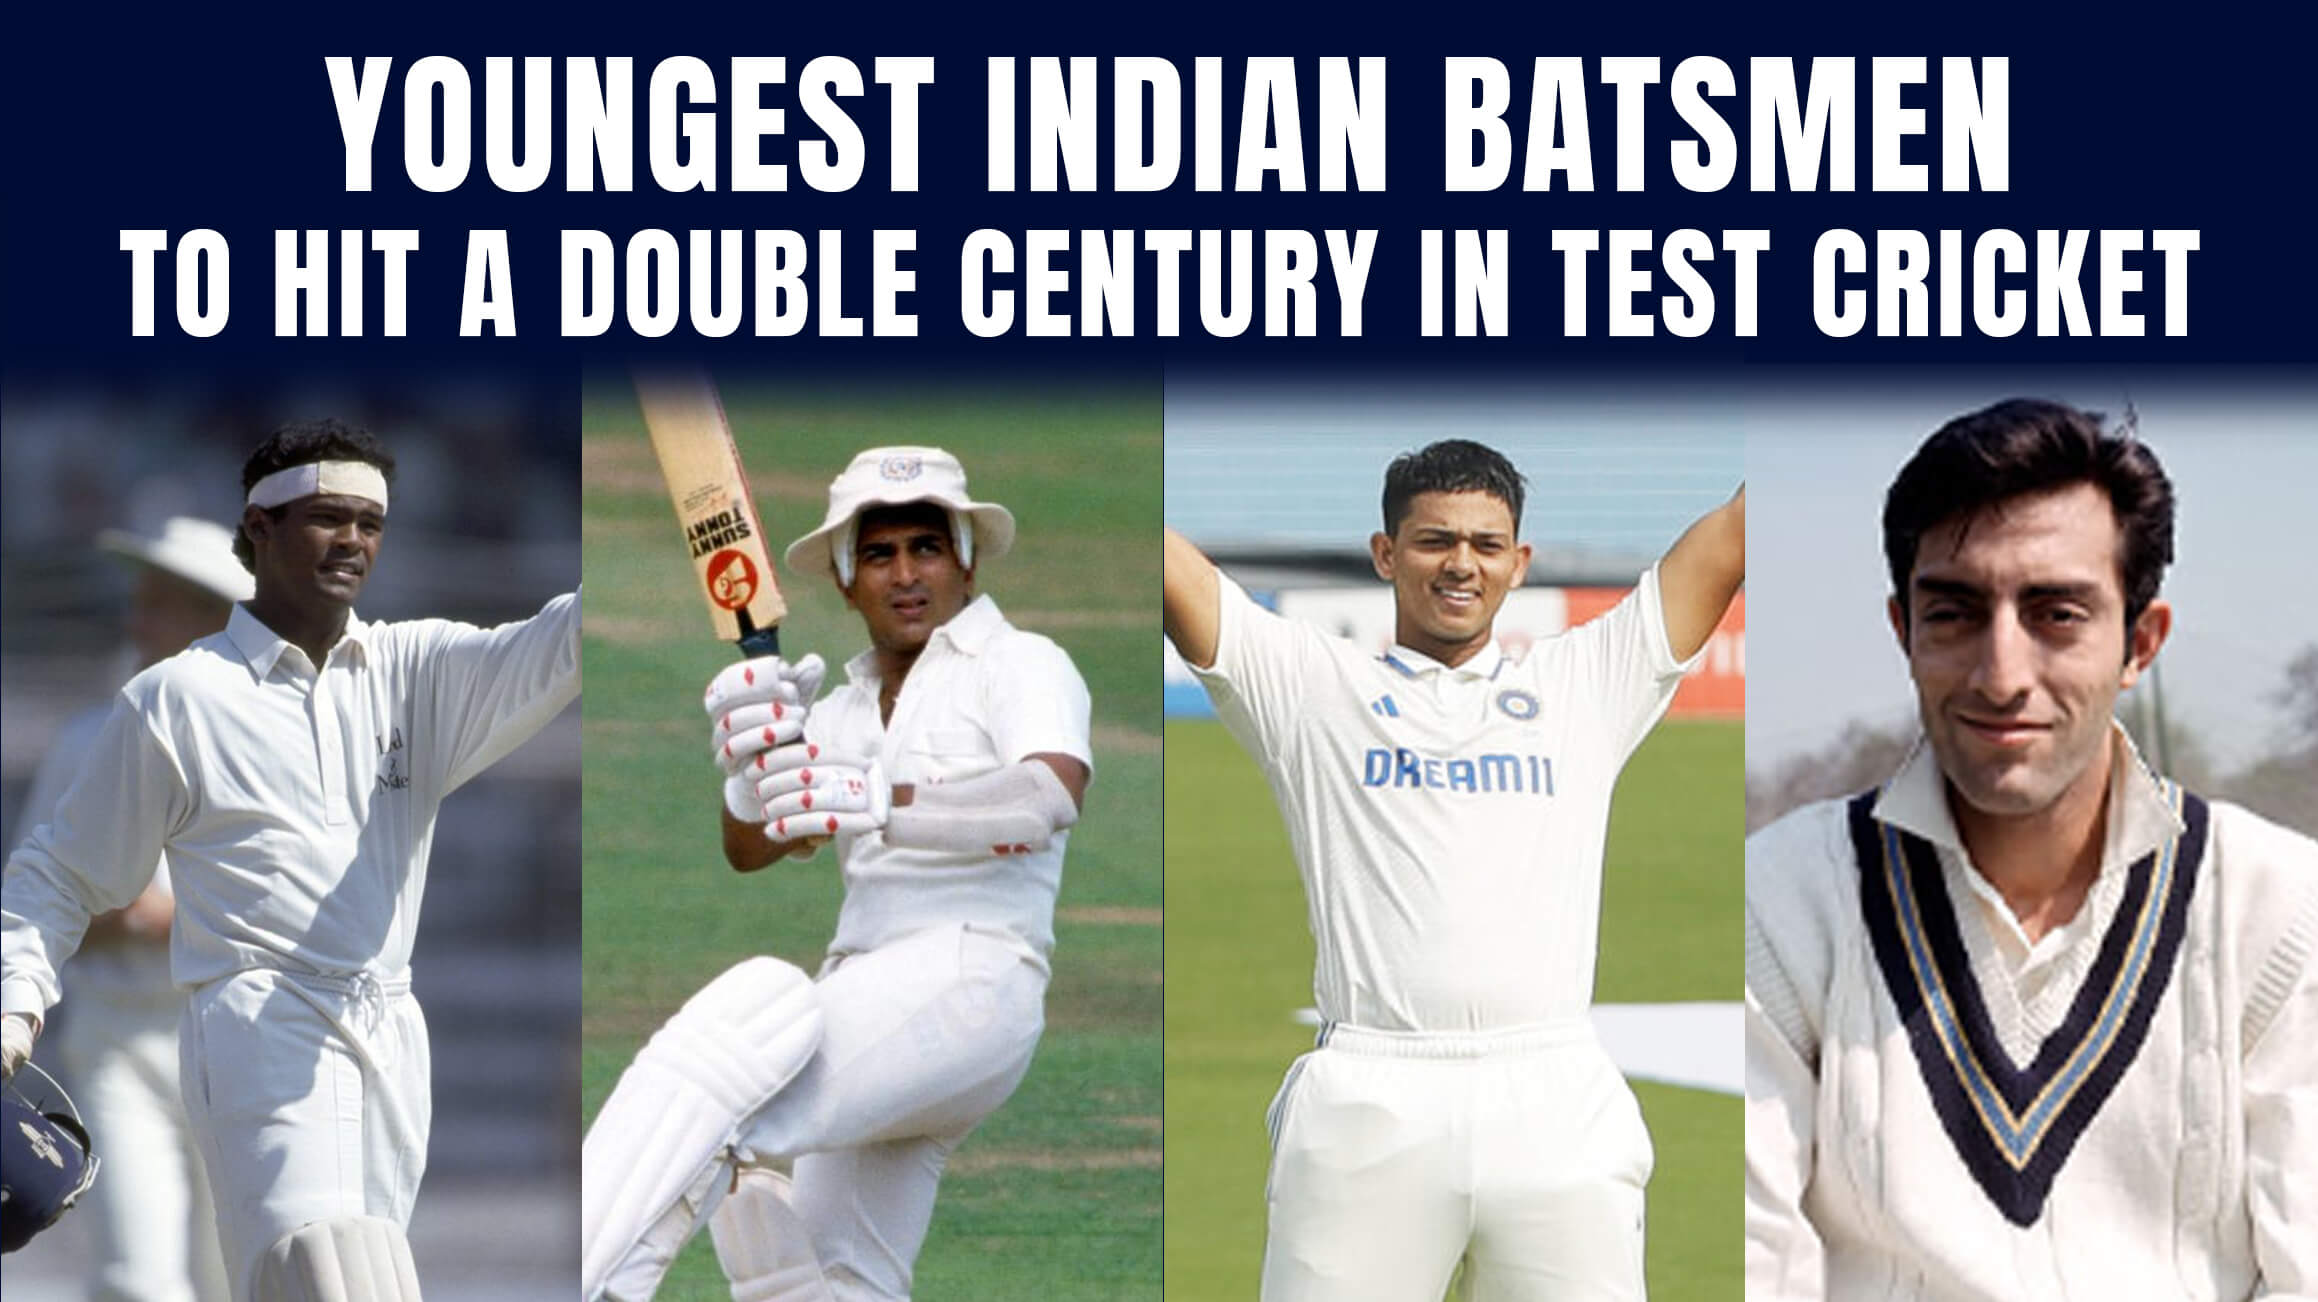 Youngest Indian Batsmen to Hit a Double Century in Test Cricket